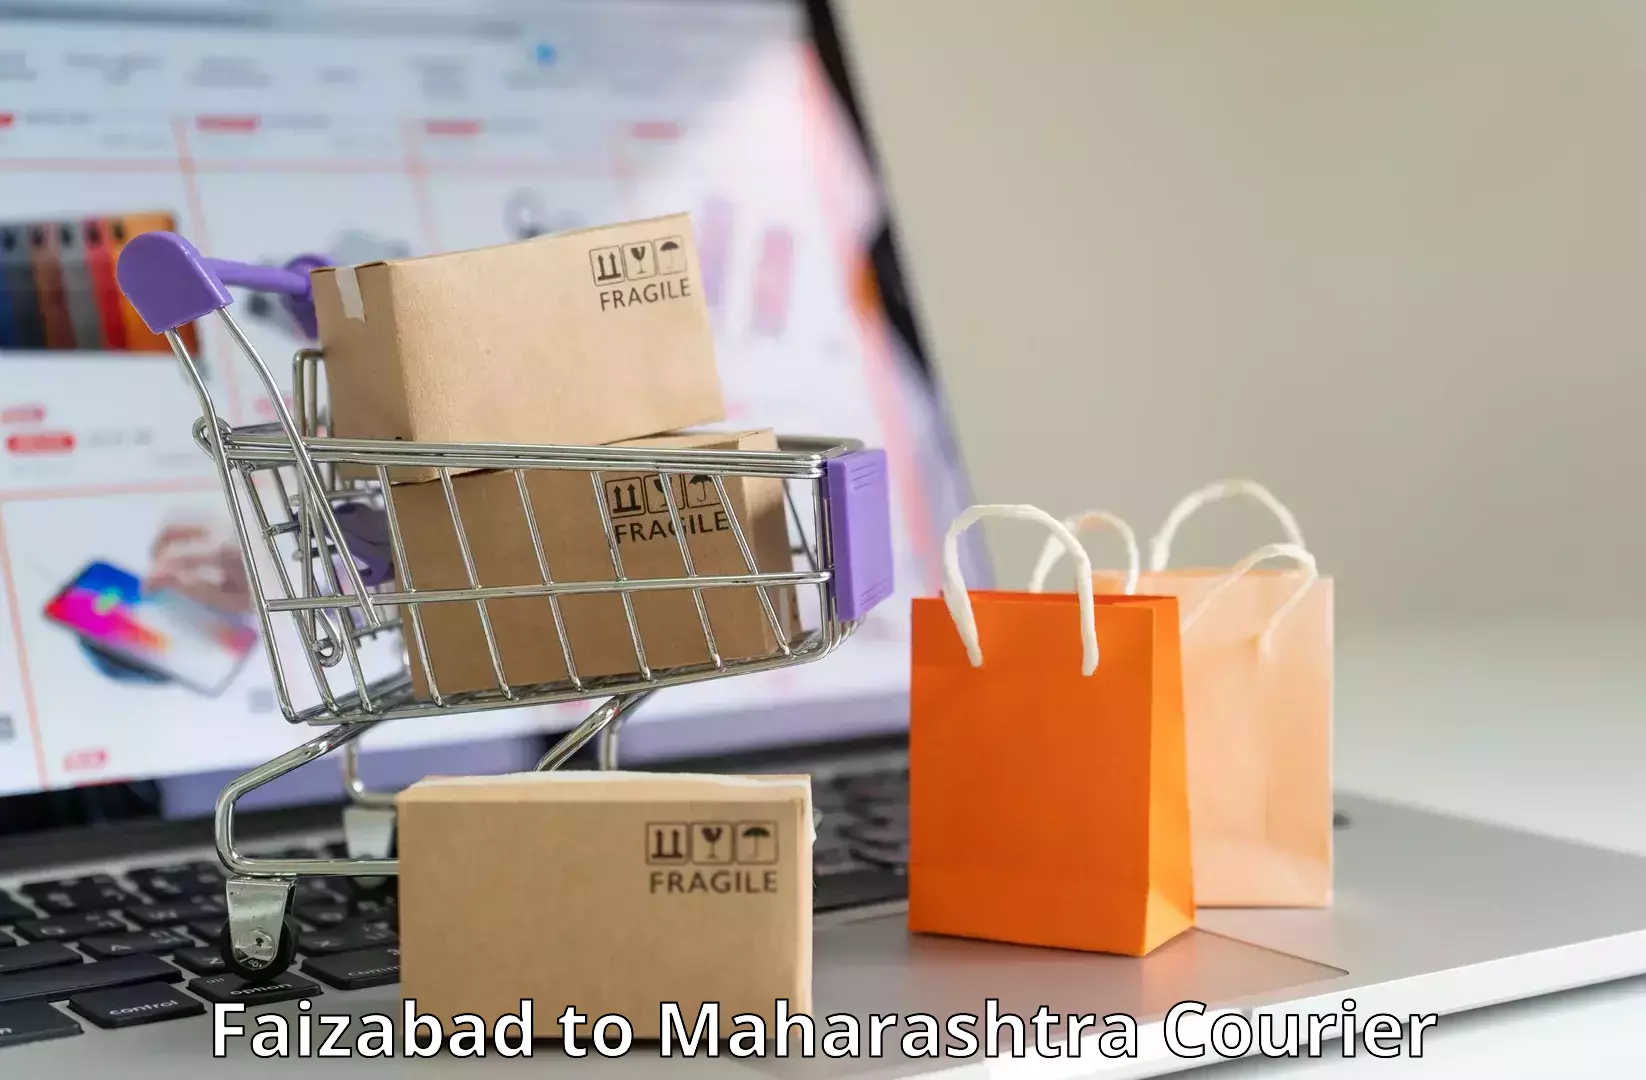 Parcel service for businesses in Faizabad to Koregaon